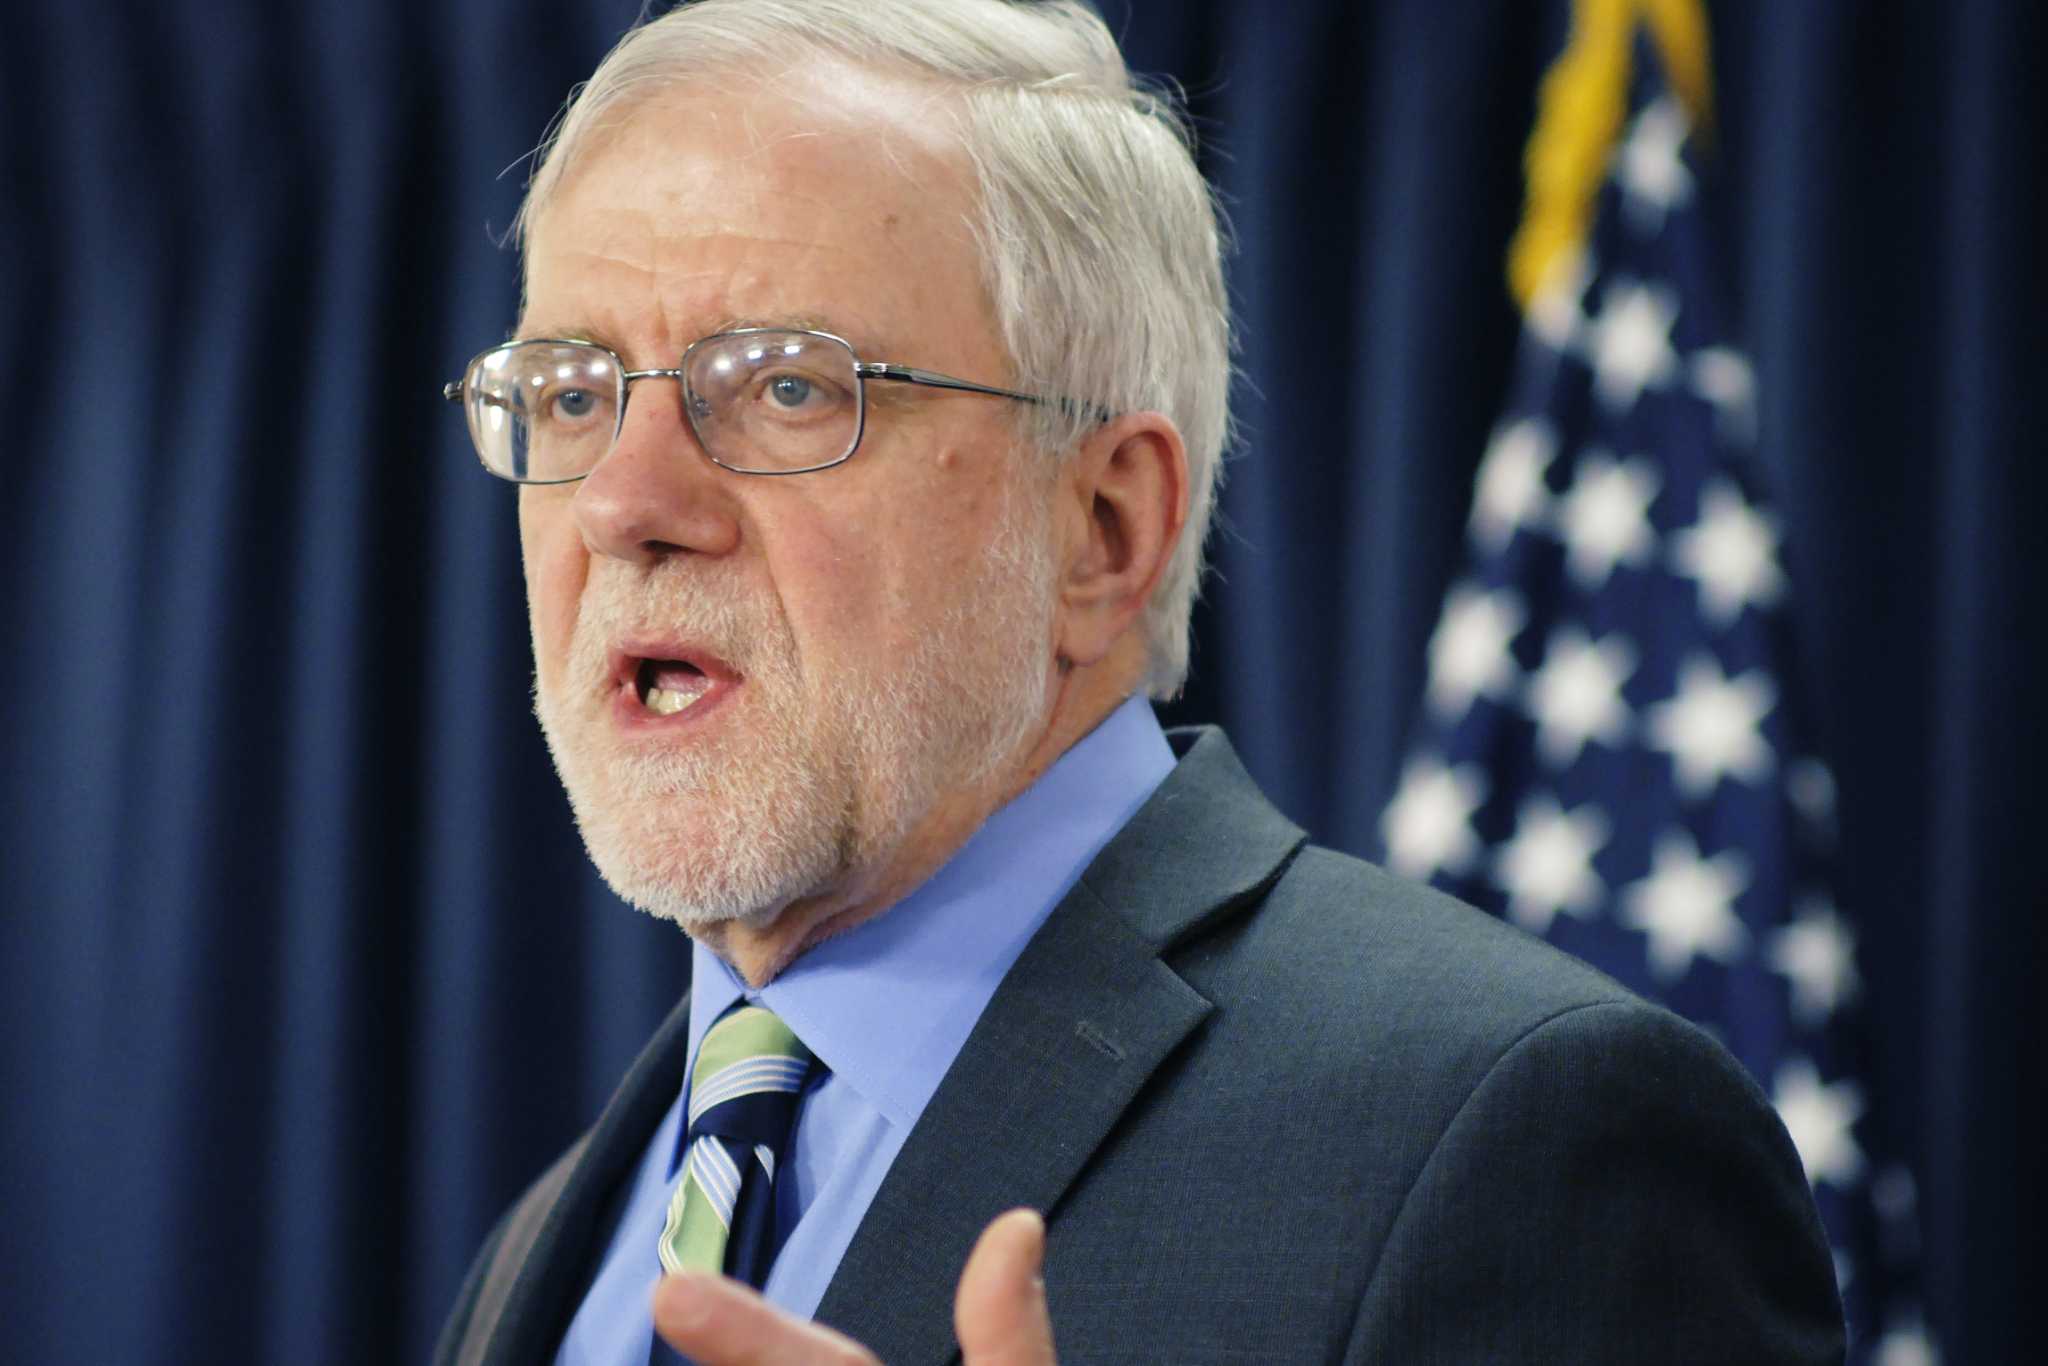 Howie Hawkins will seek Green nomination for president - Times Union